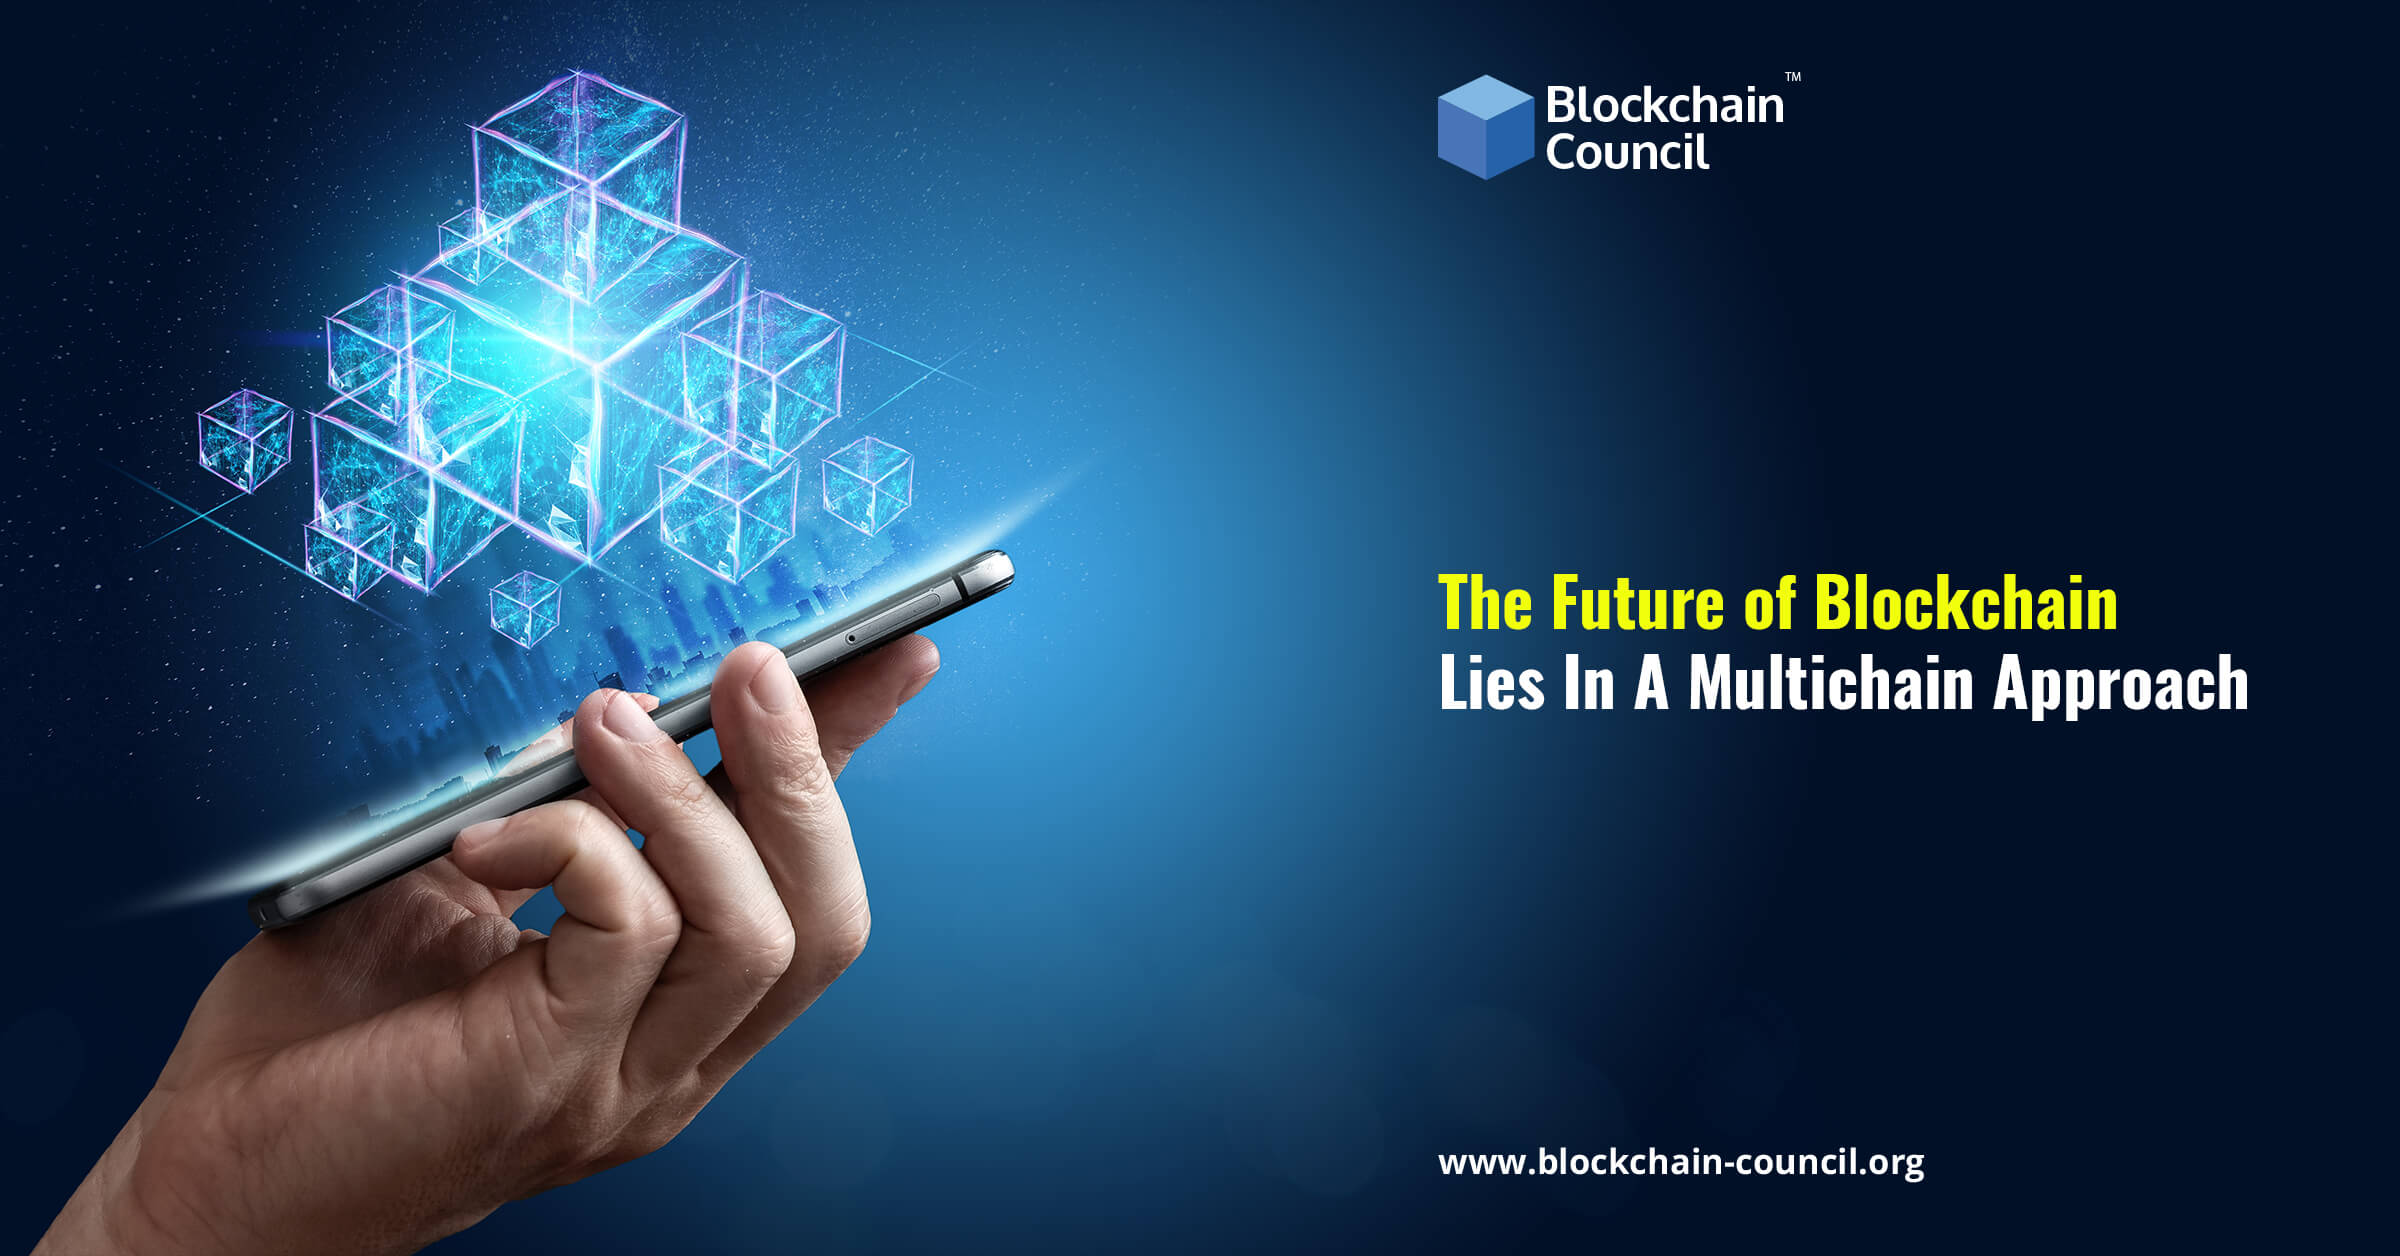 The Future of Blockchain Lies In A Multichain Approach